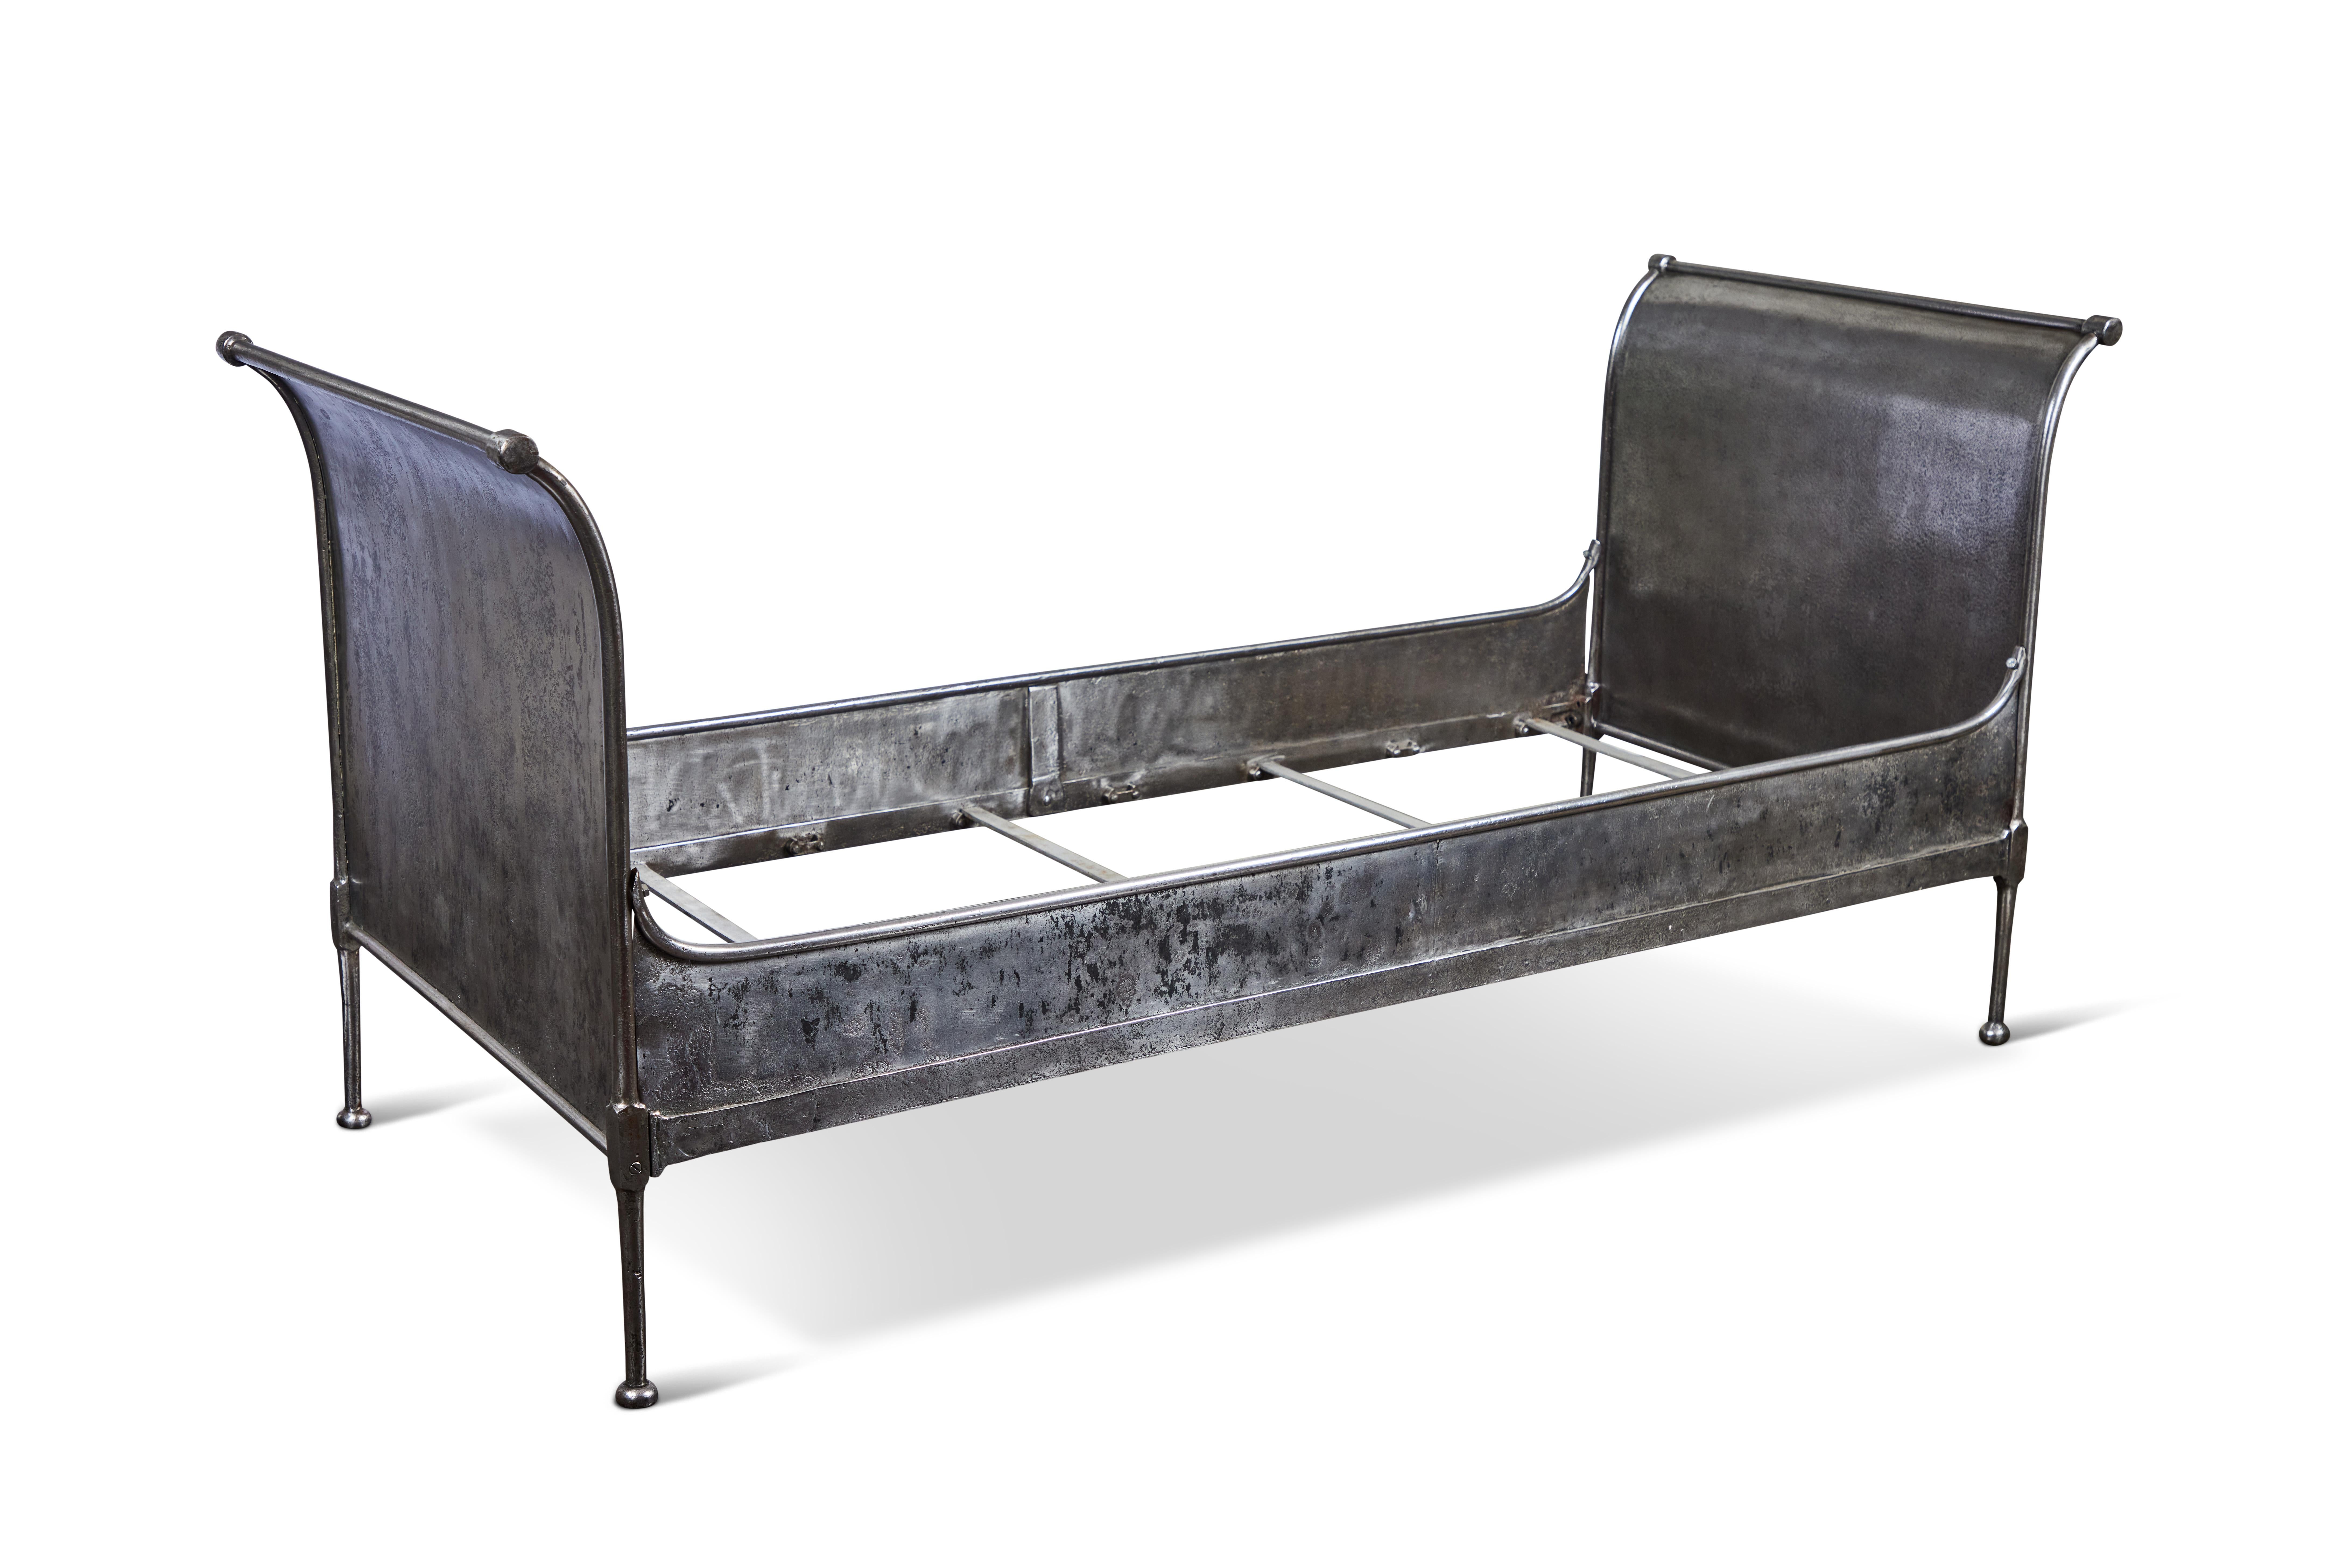 Classic sleigh style steel daybed, 19th century. Excellent condition, newly polished.

Inset dimensions:
H: 16